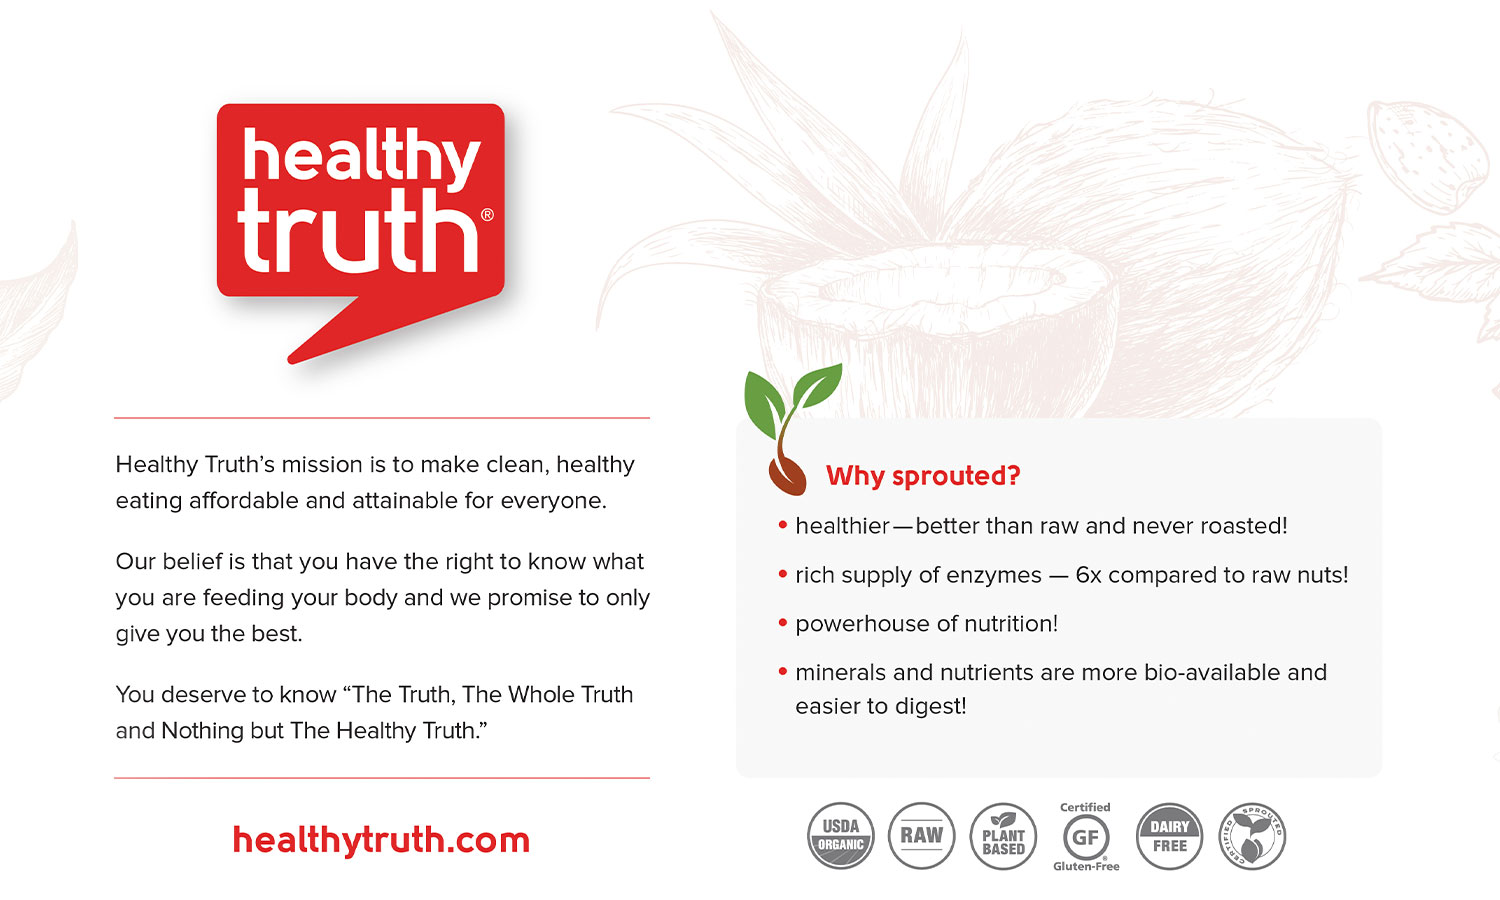 'About Healthy Truth' infographic